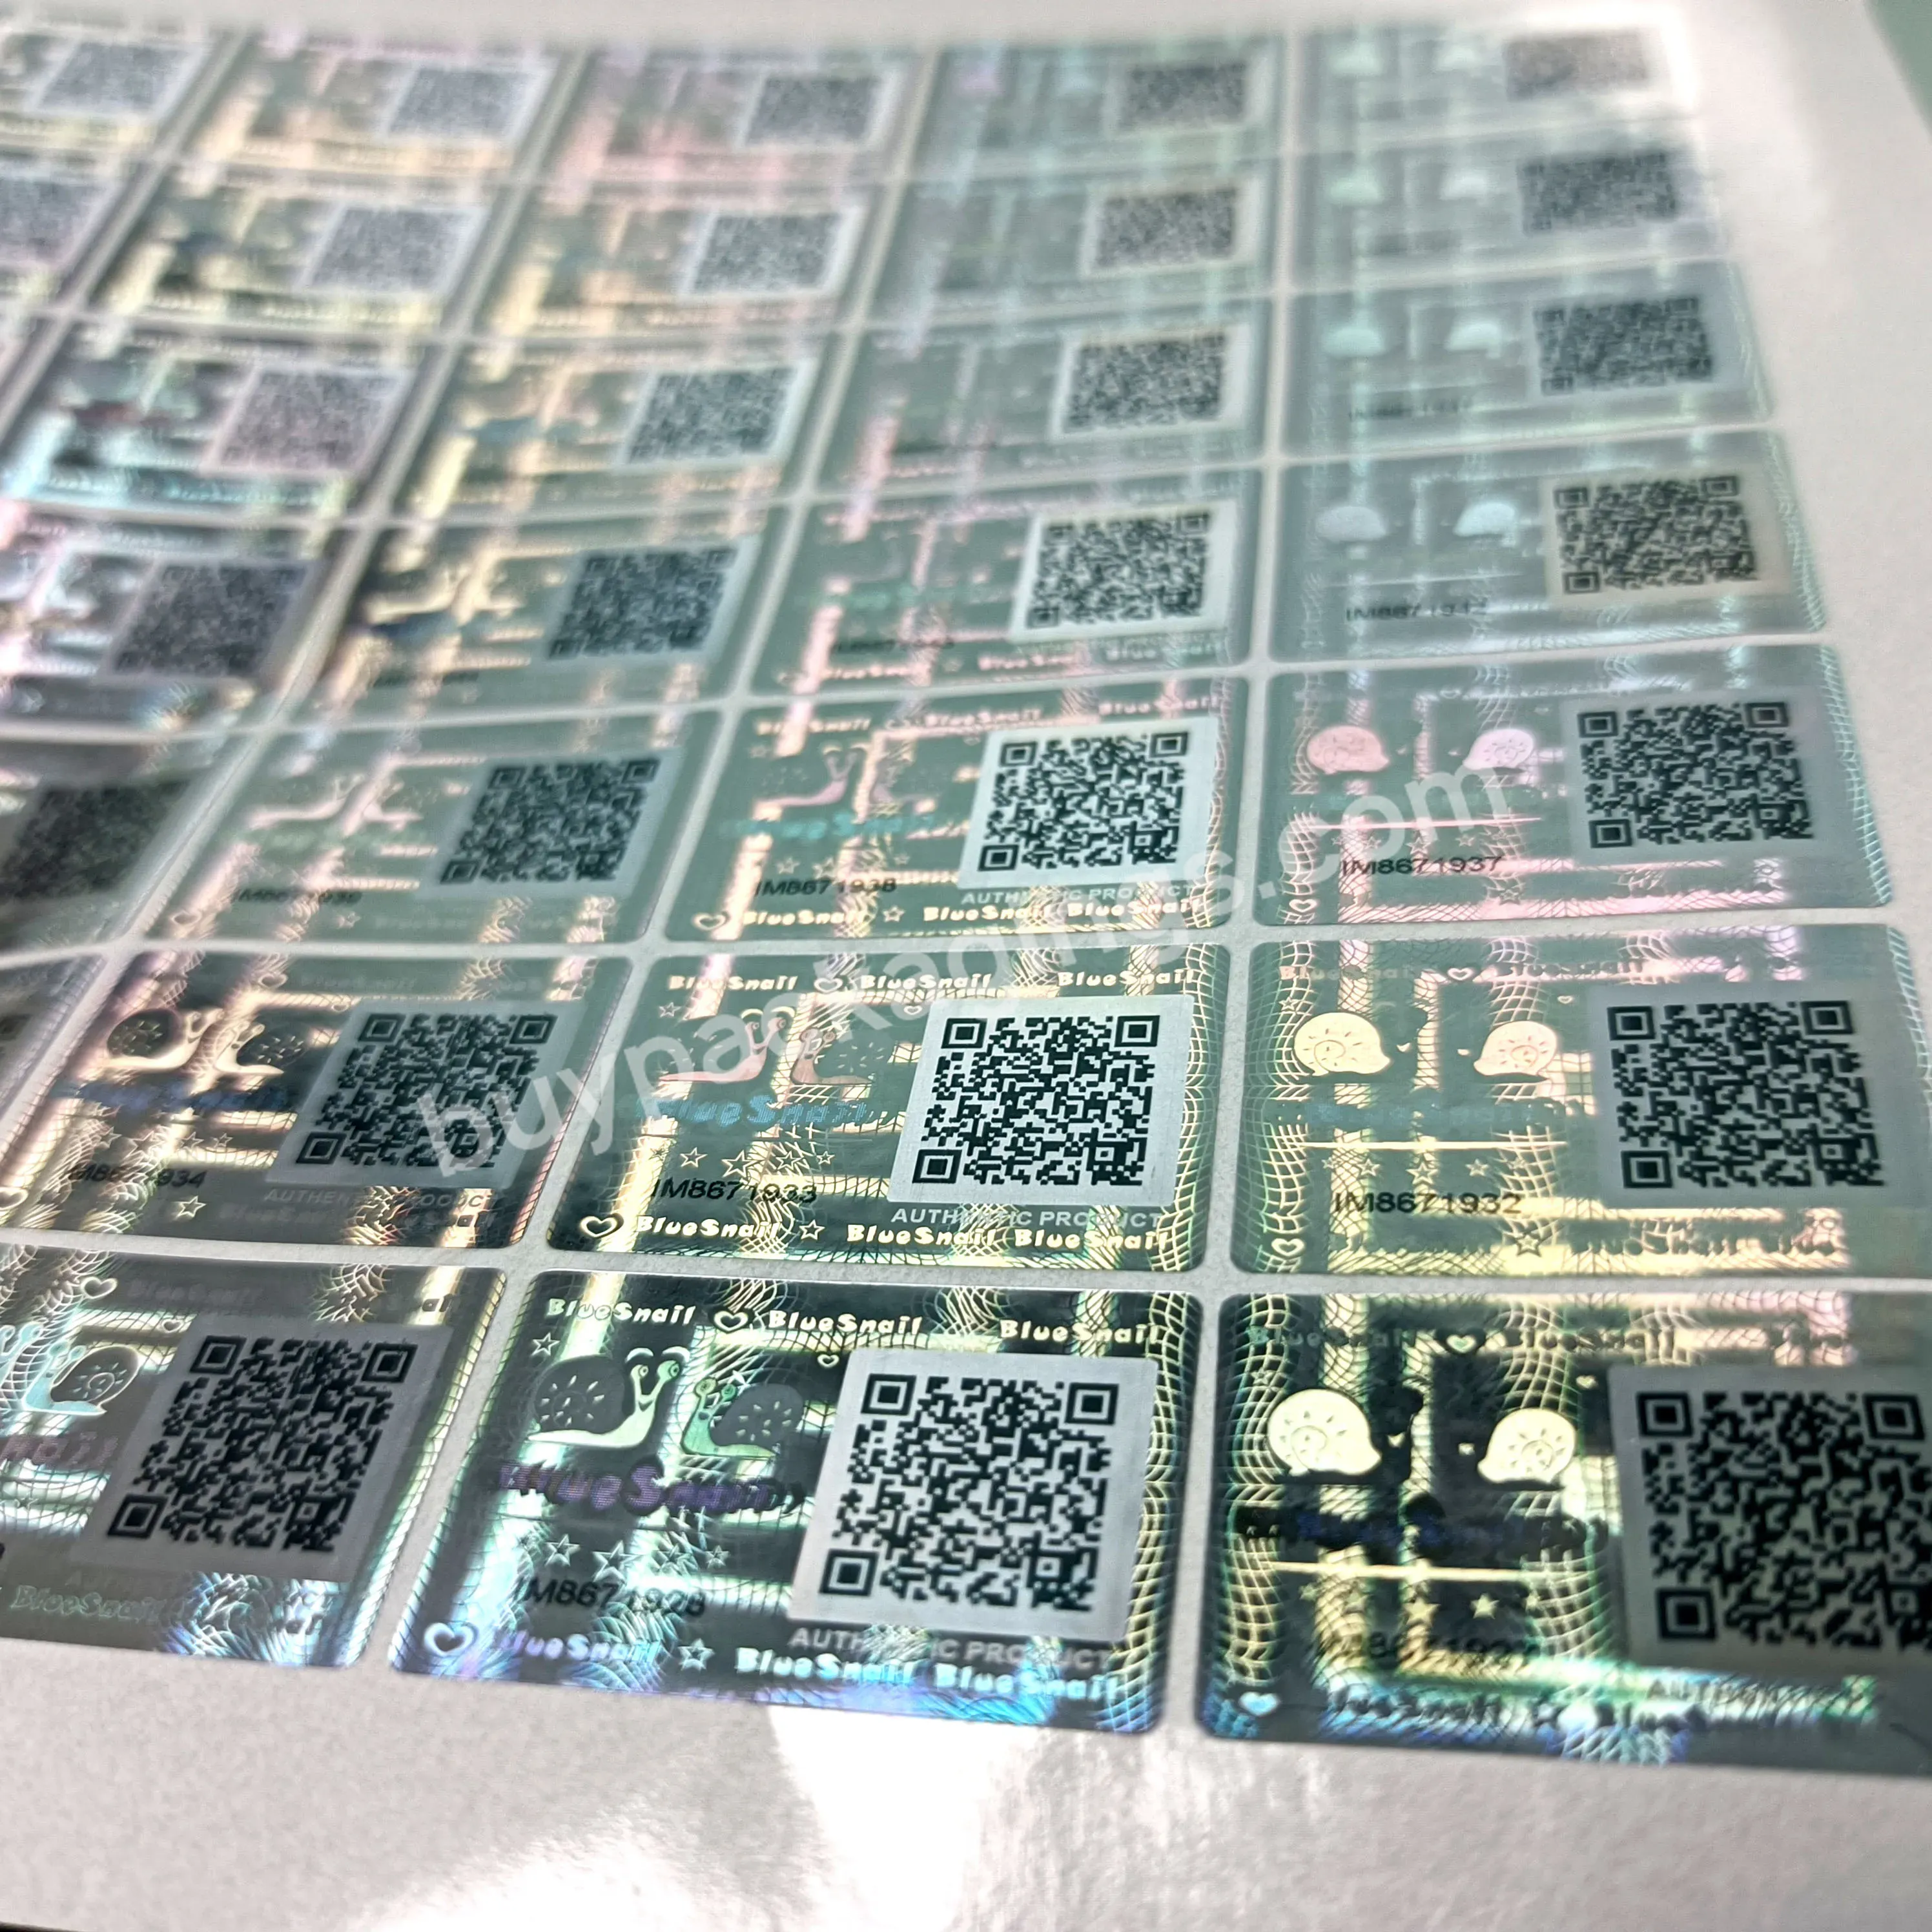 Custom Stickers Laminated Holographic Stickers Qr Code Sticker Sheet Anti-counterfeiting Logo Partial Packaging Labels - Buy Custom Stickers,Holographic Stickers,Anti-counterfeiting Qr Code Logo.